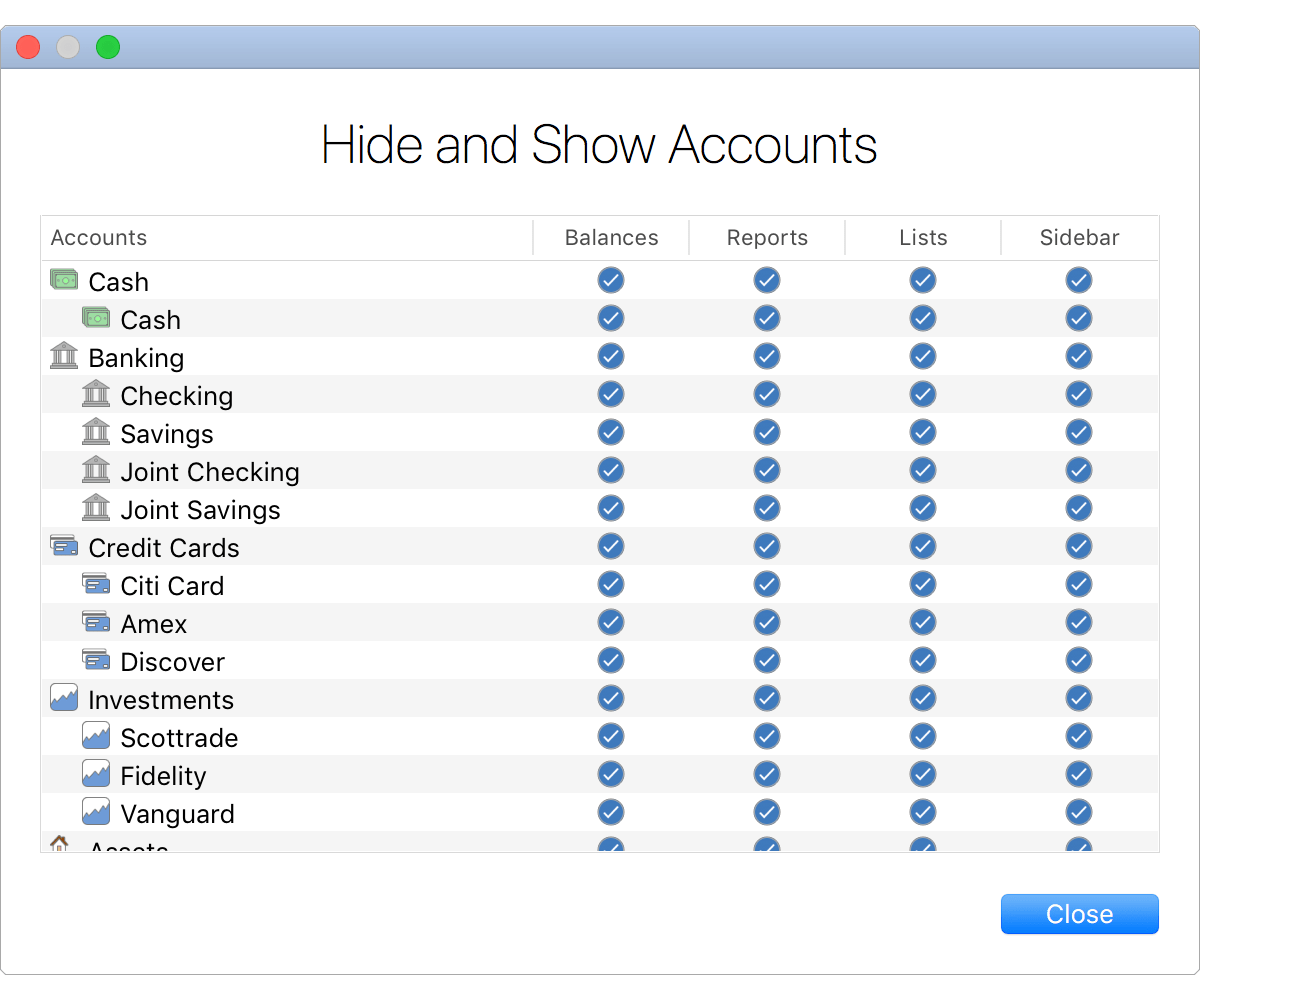 Hide and Show Accounts